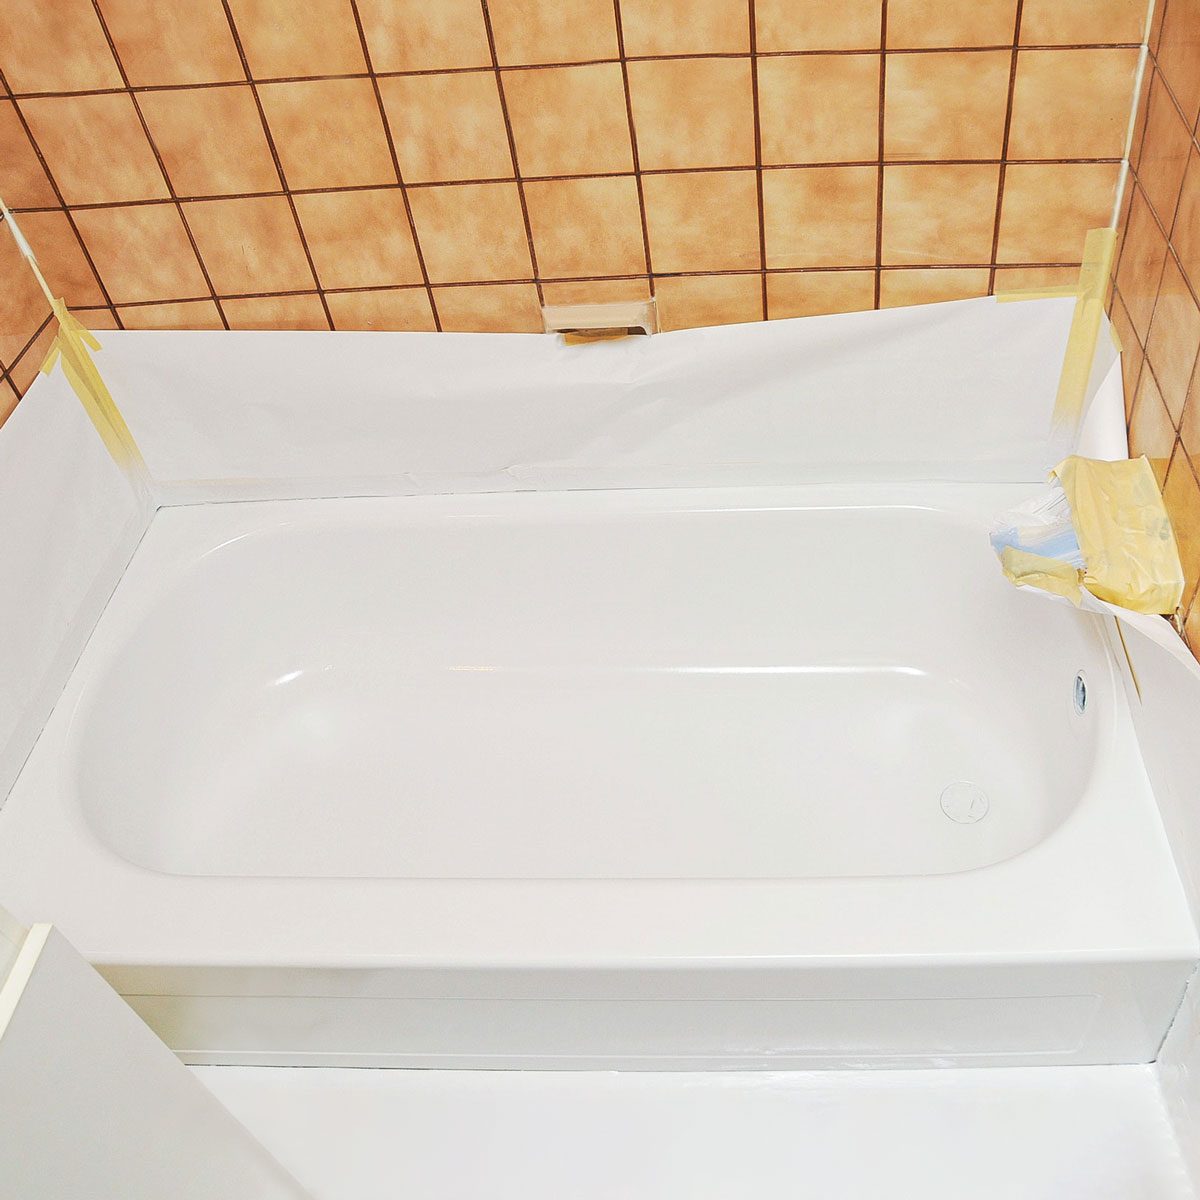 What To Know About Reglazing a Tub